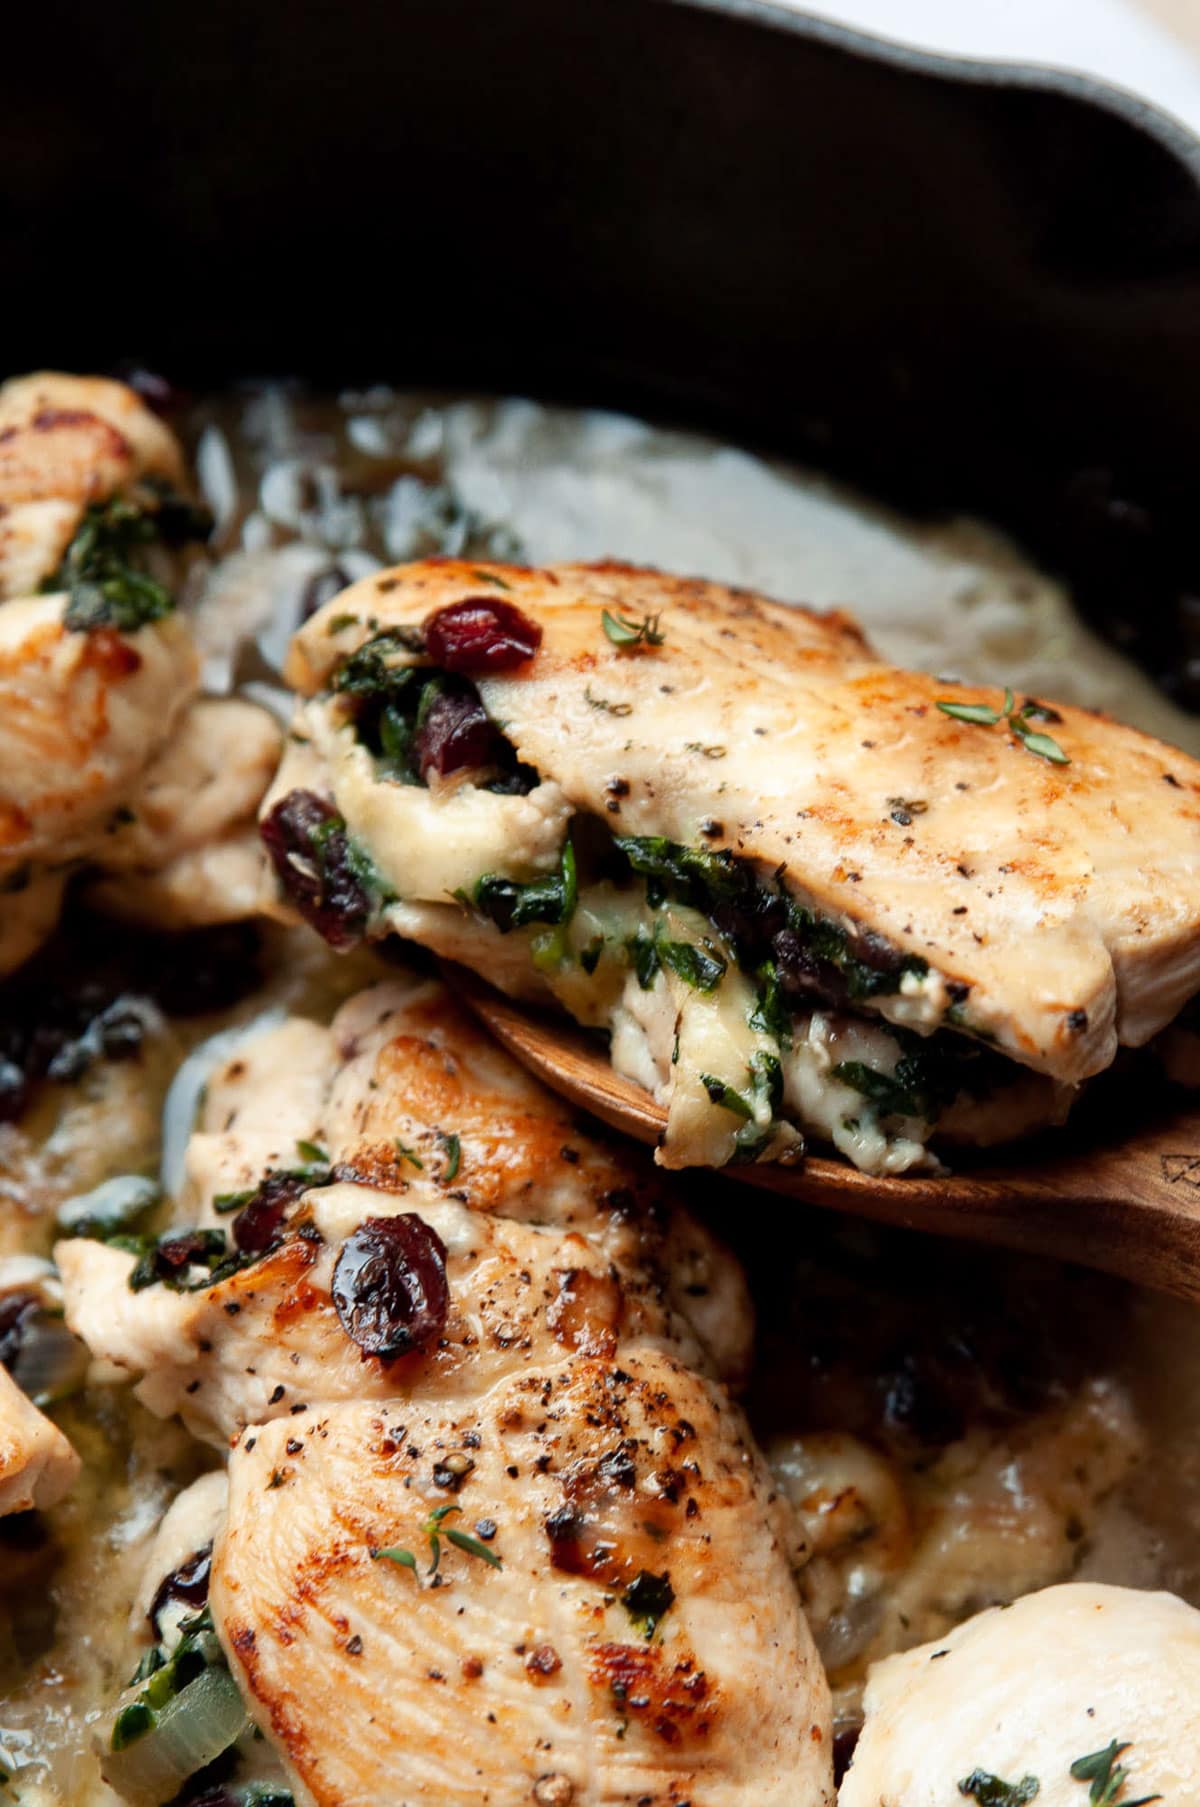 Closeup of chicken breast stuffed with spinach, cranberries and brie cheese.